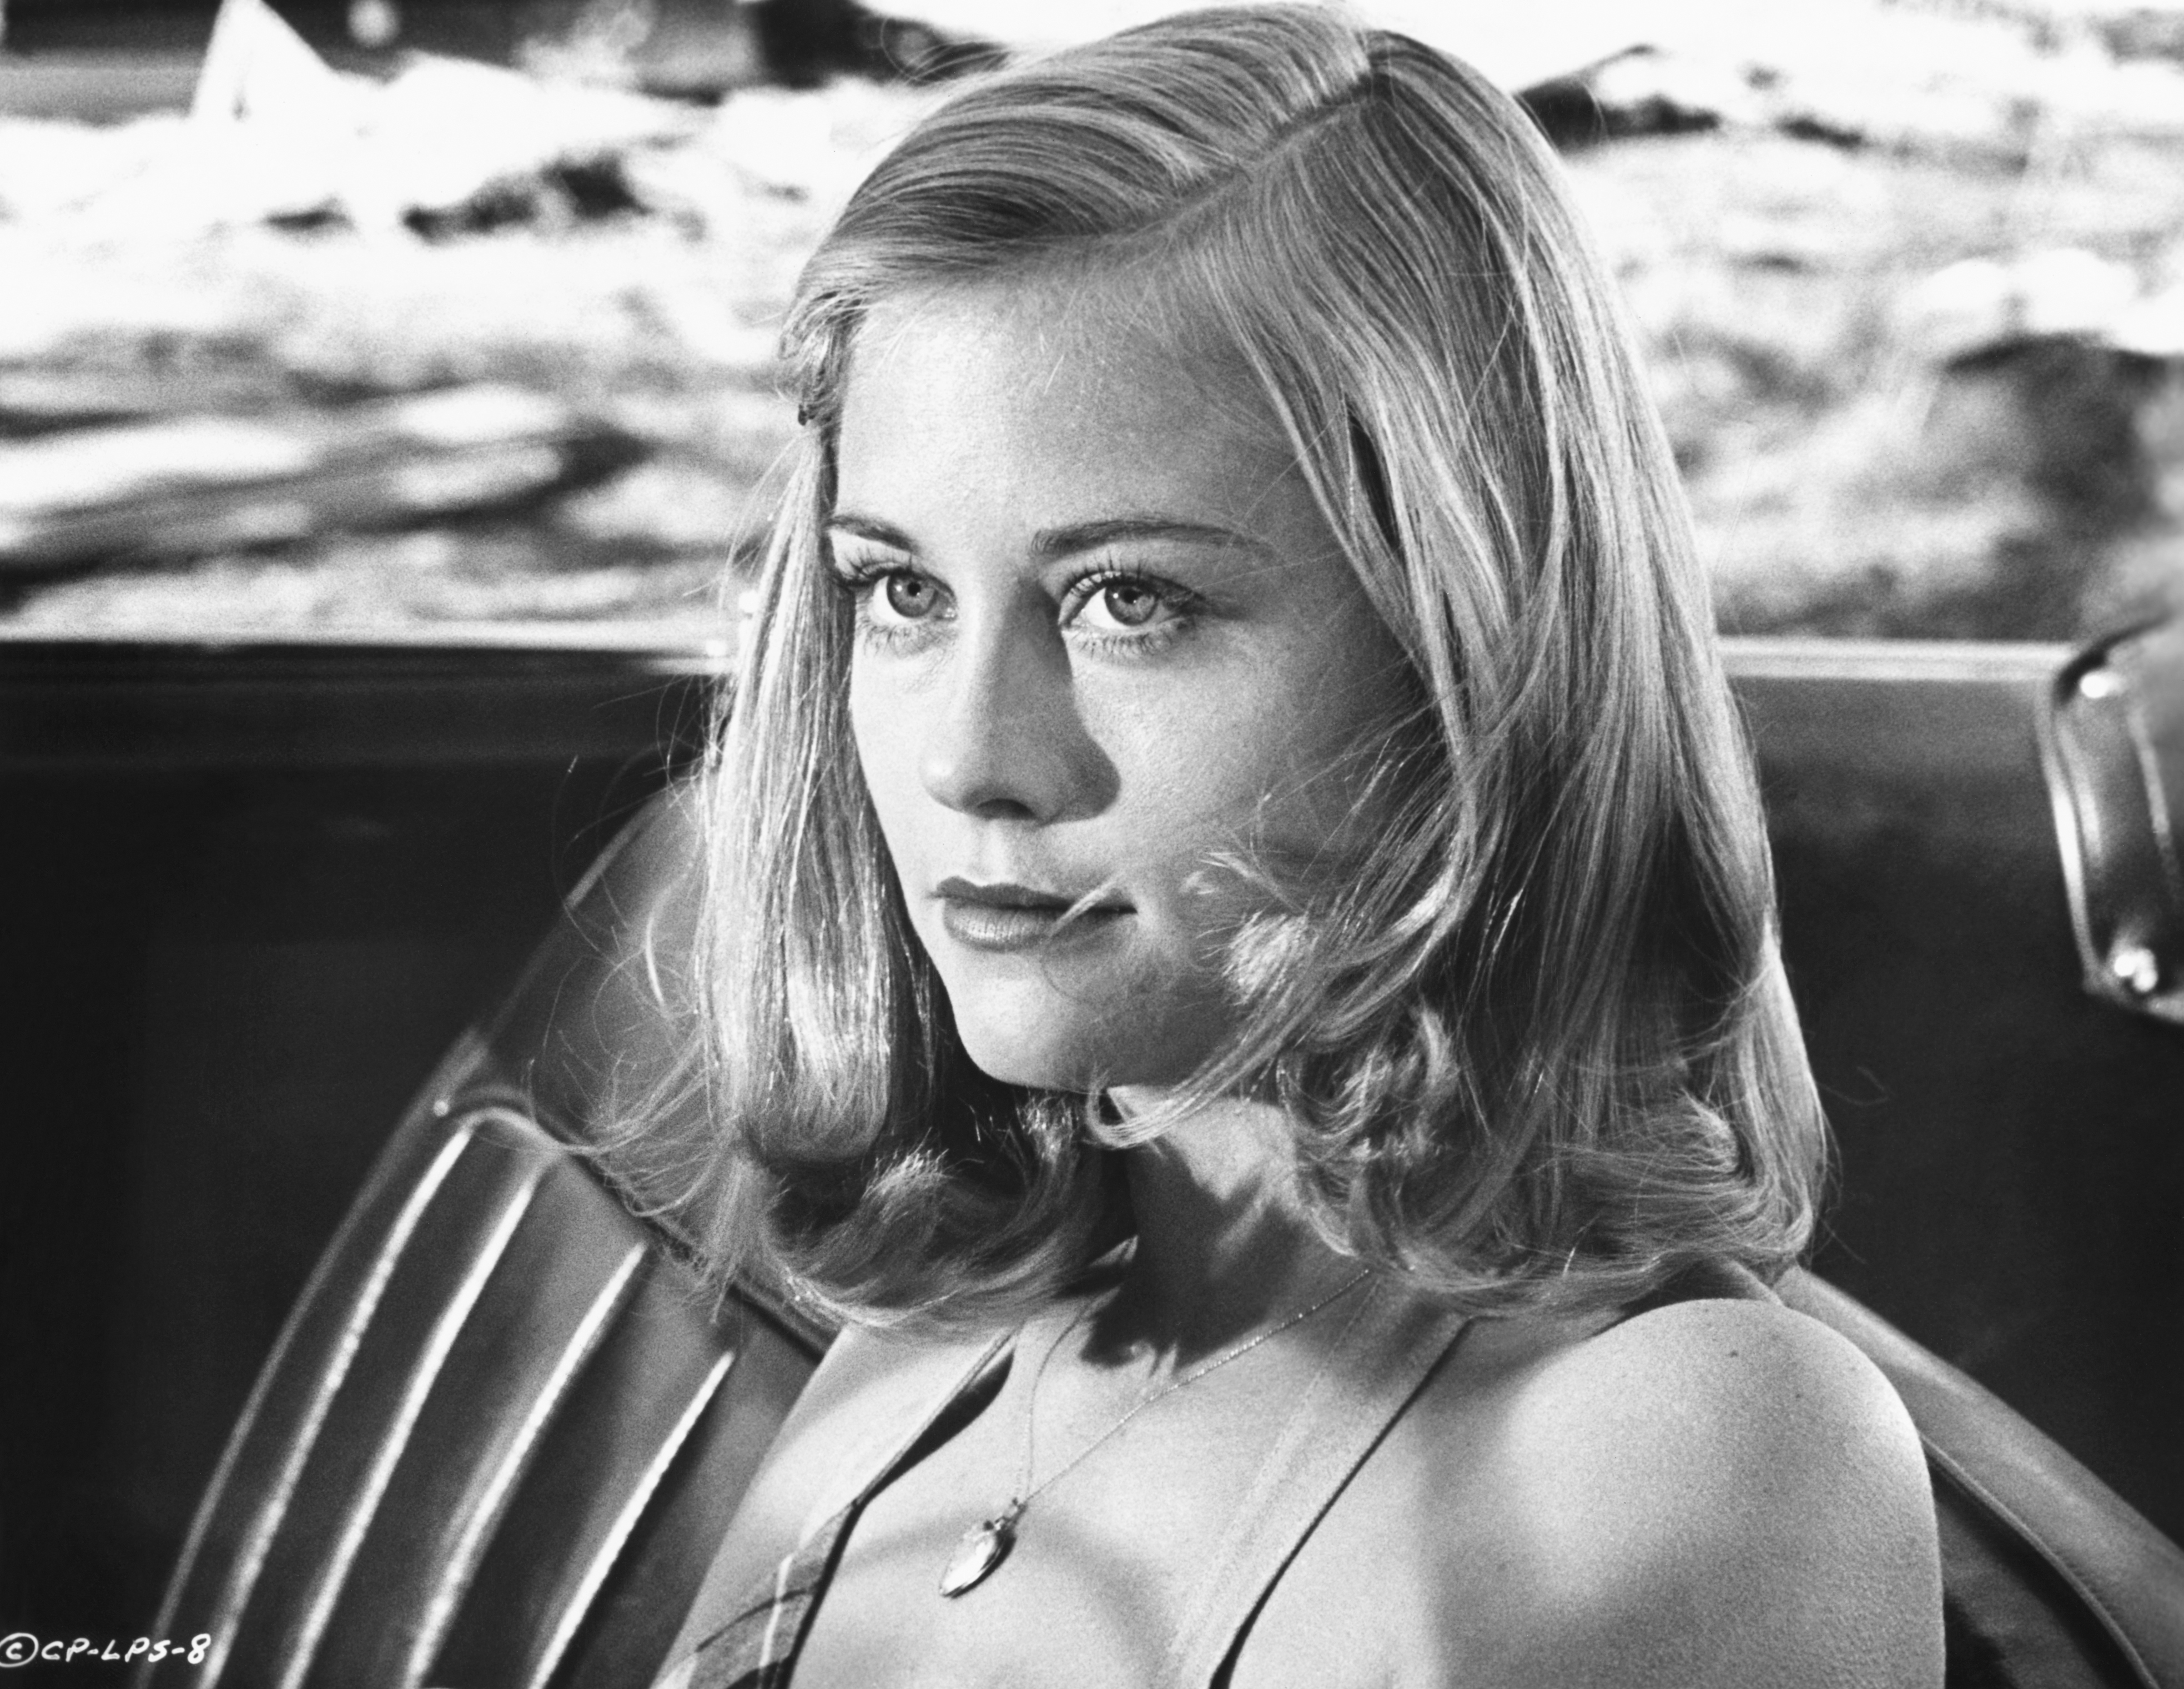 Cybill Shepherd on "The Last Picture Show" in 1971 | Source: Getty Images